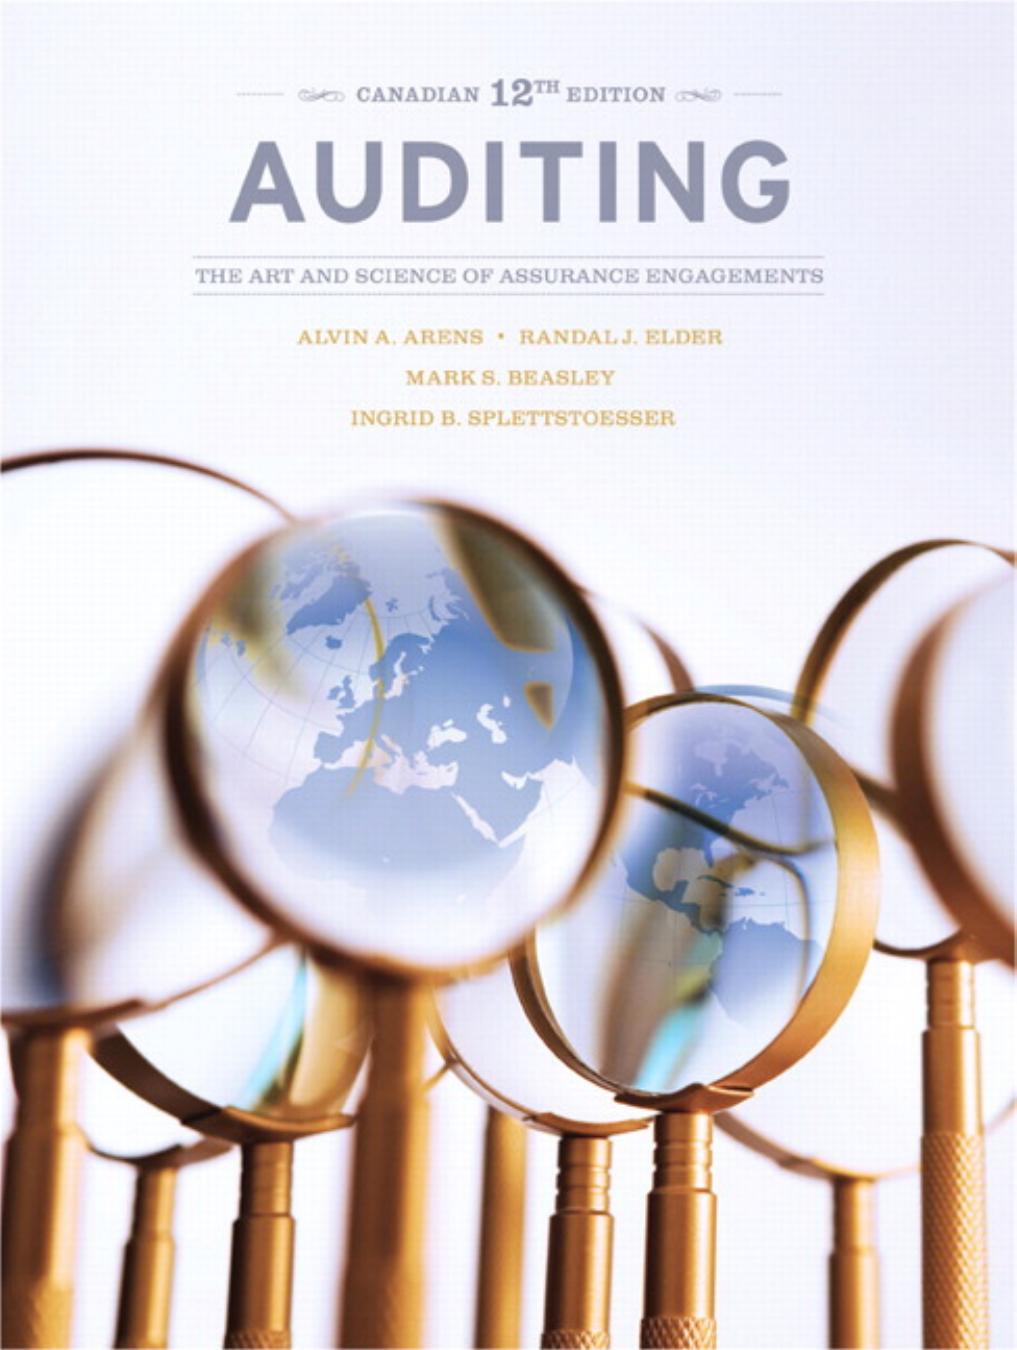 (eBook PDF)Auditing The Art and Science of Assurance Engagements, 12th Canadian Edition by Alvin A. Arens,Randal J. Elder